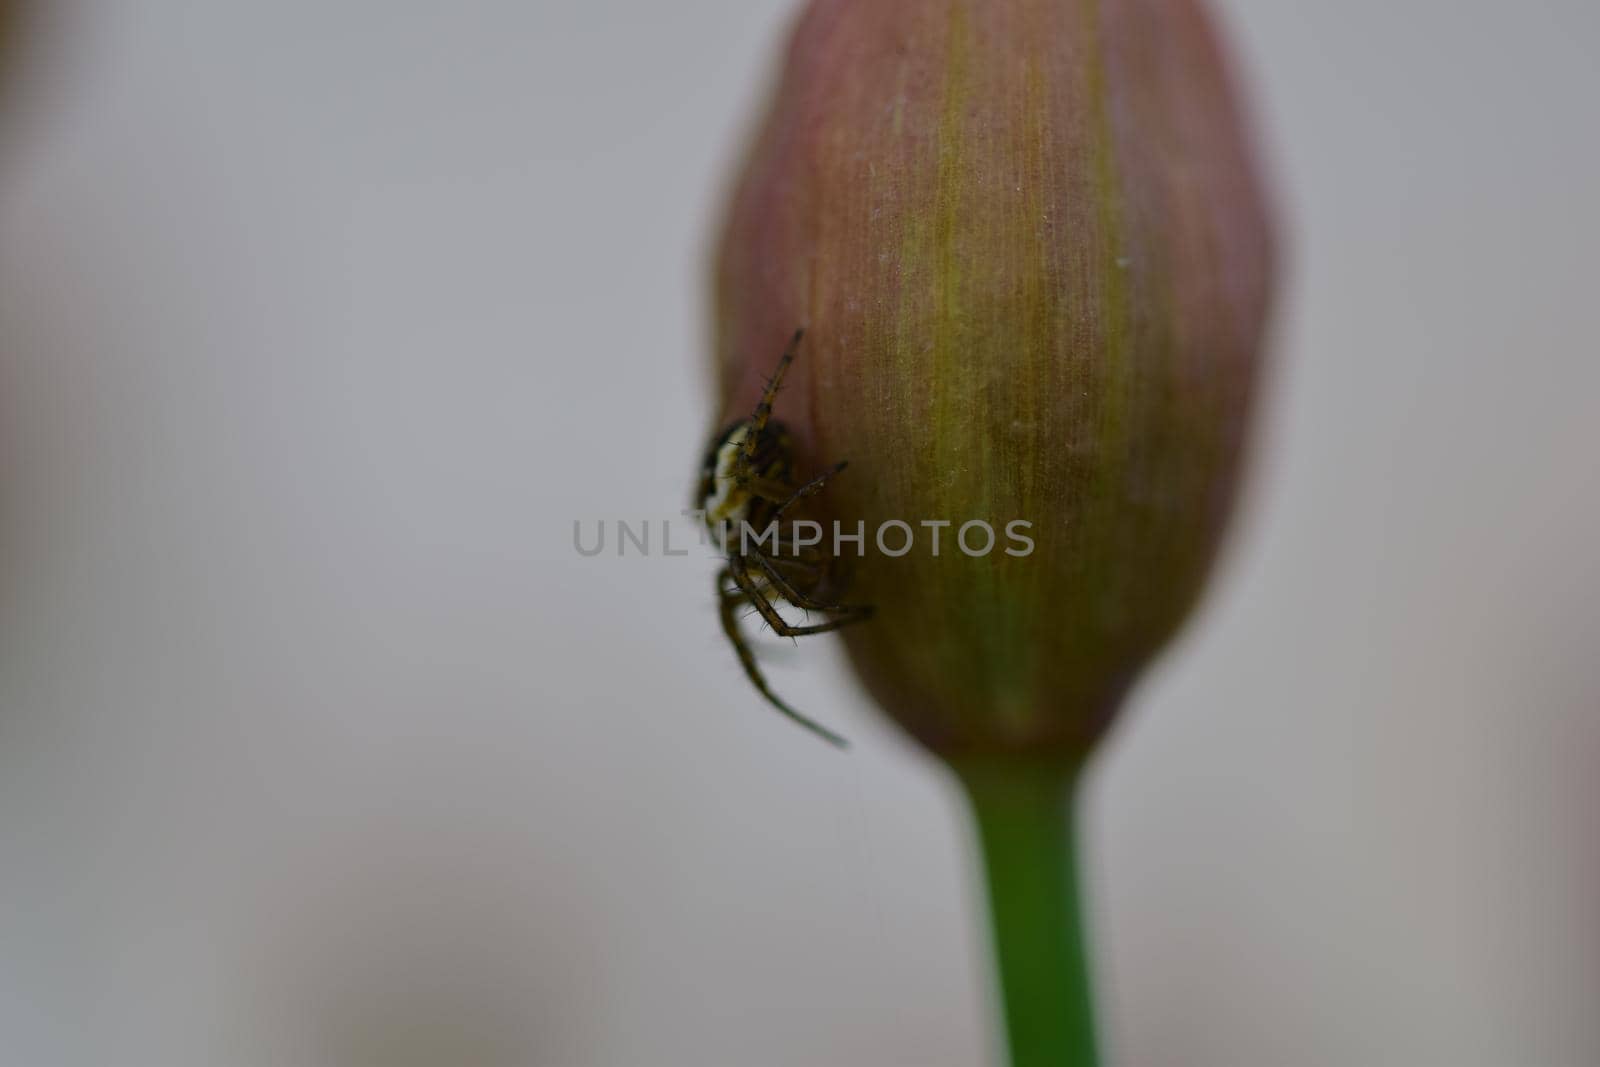 Little cross spider sitting at a chives bud as a close up